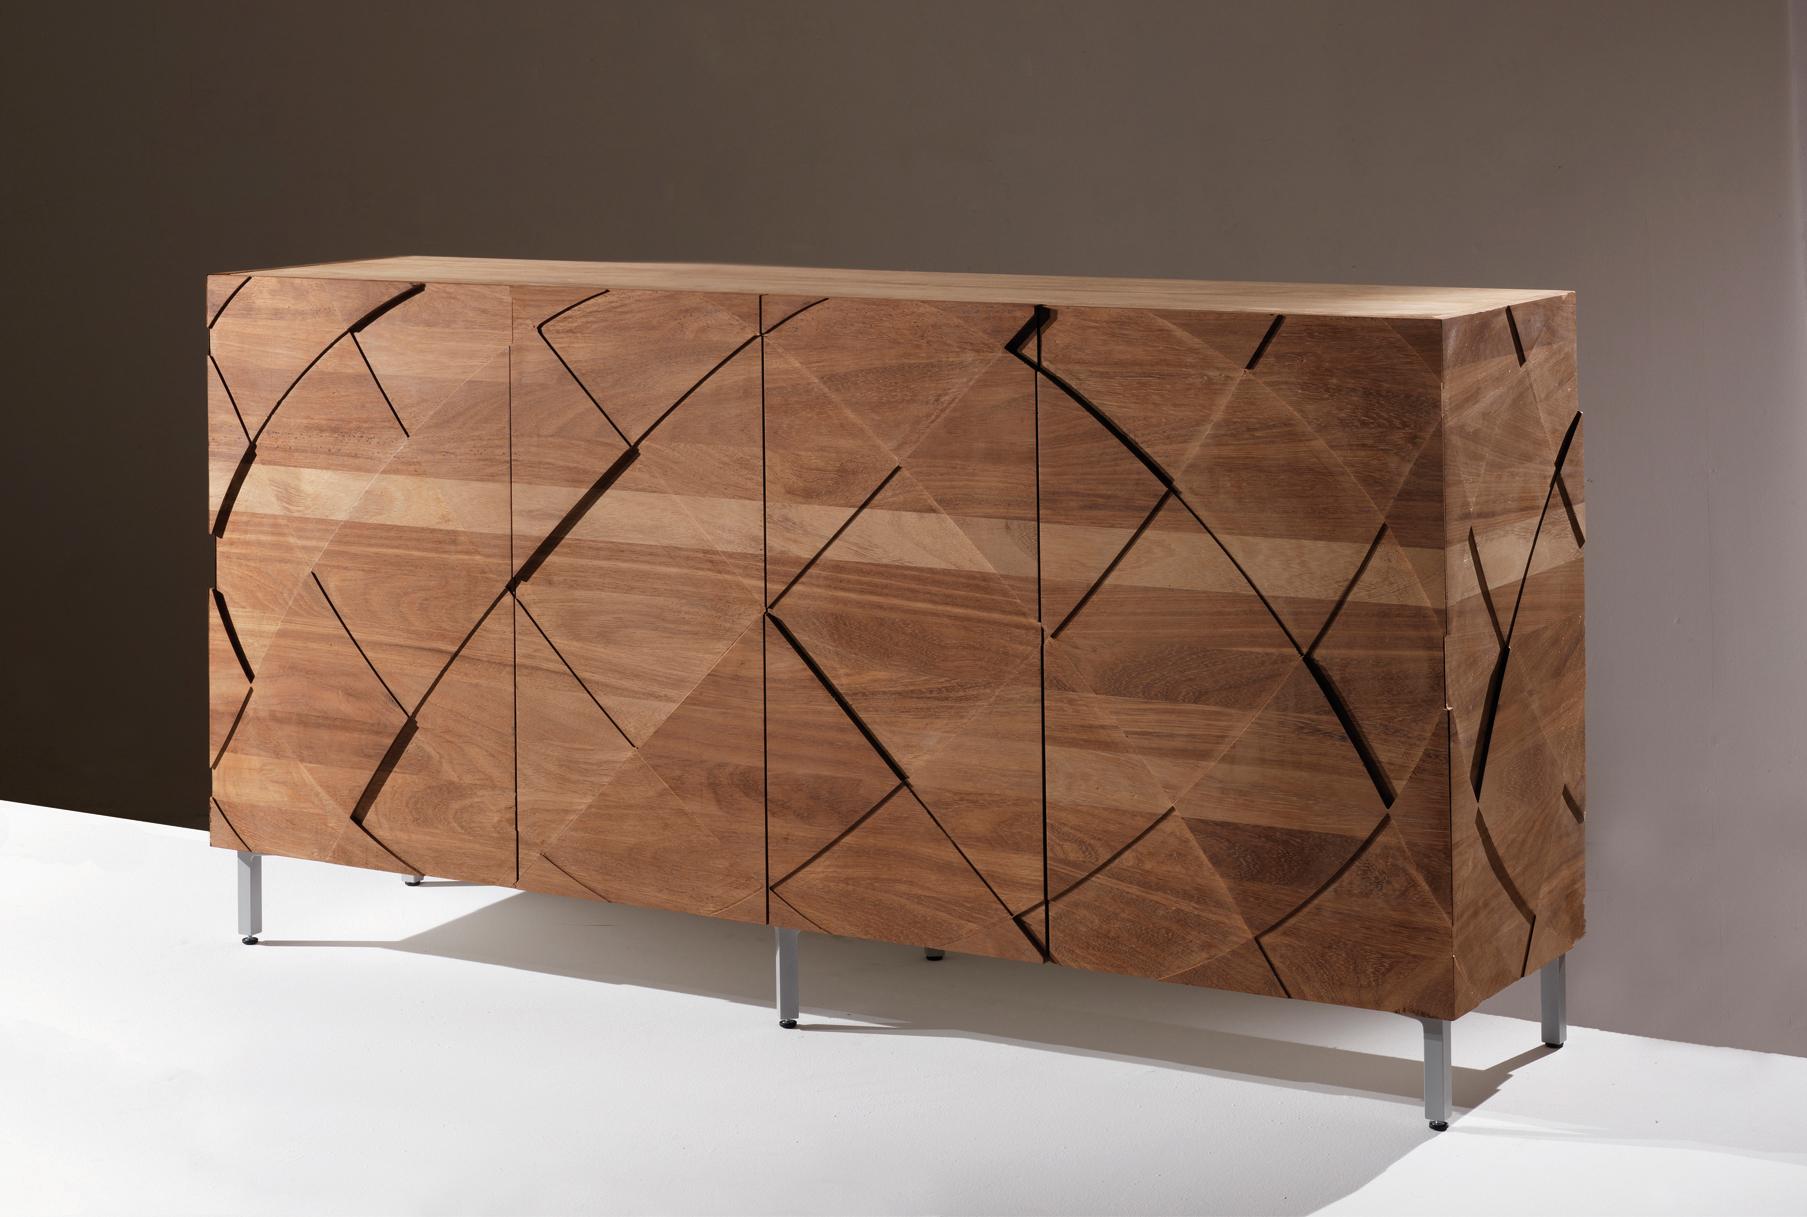 Sedici is a storage unit made in solid wood and with an extremely regular shape. All the parts of this piece of furniture are assembled with cuts of 45 degrees, so that the external edges will turn out to simply be thin lines. Its dynamism can be